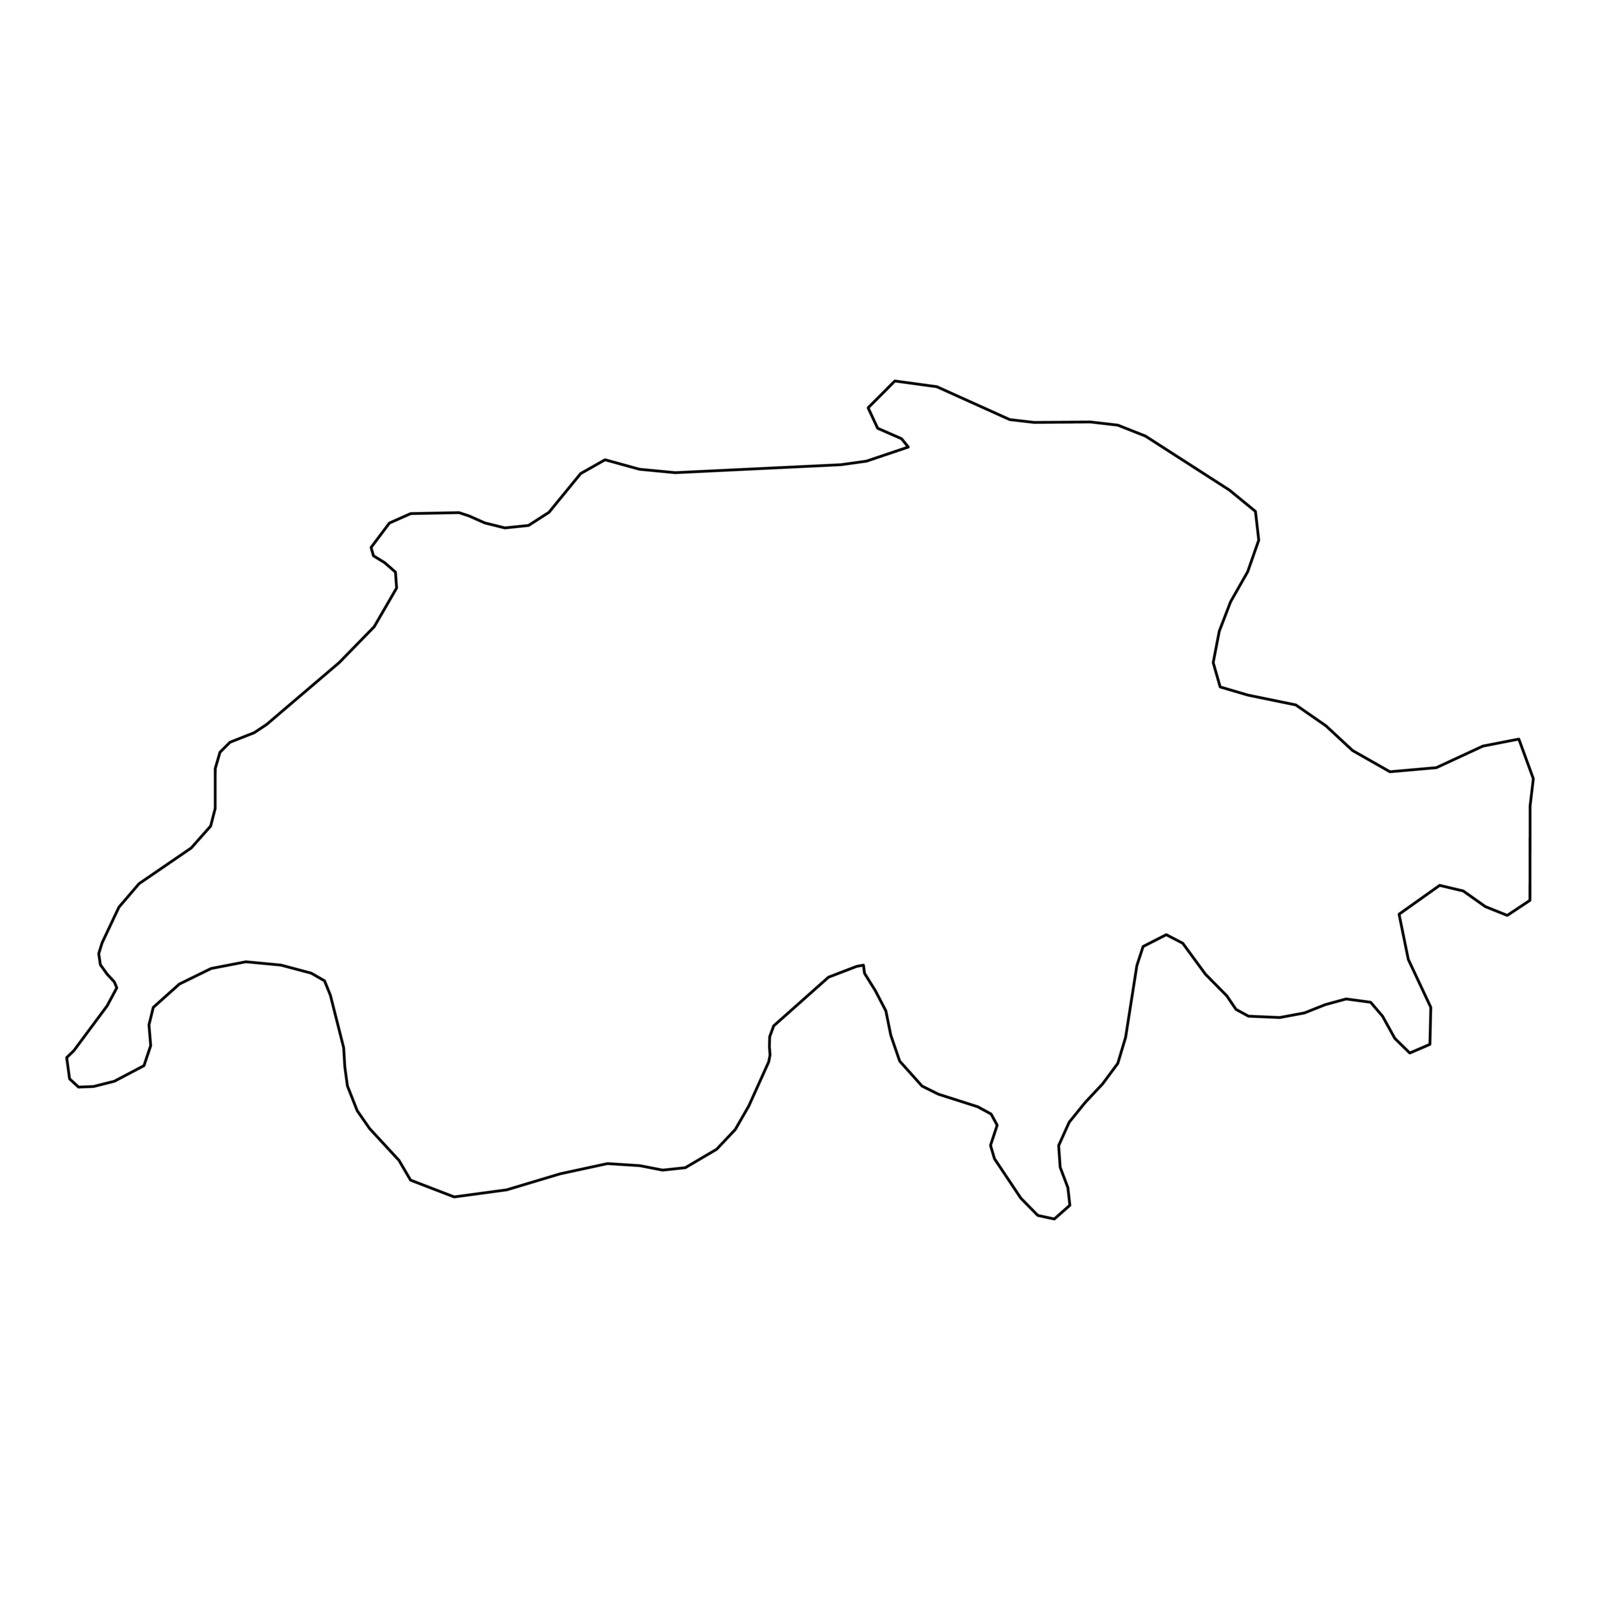 Switzerland - solid black outline border map of country area. Simple flat vector illustration.